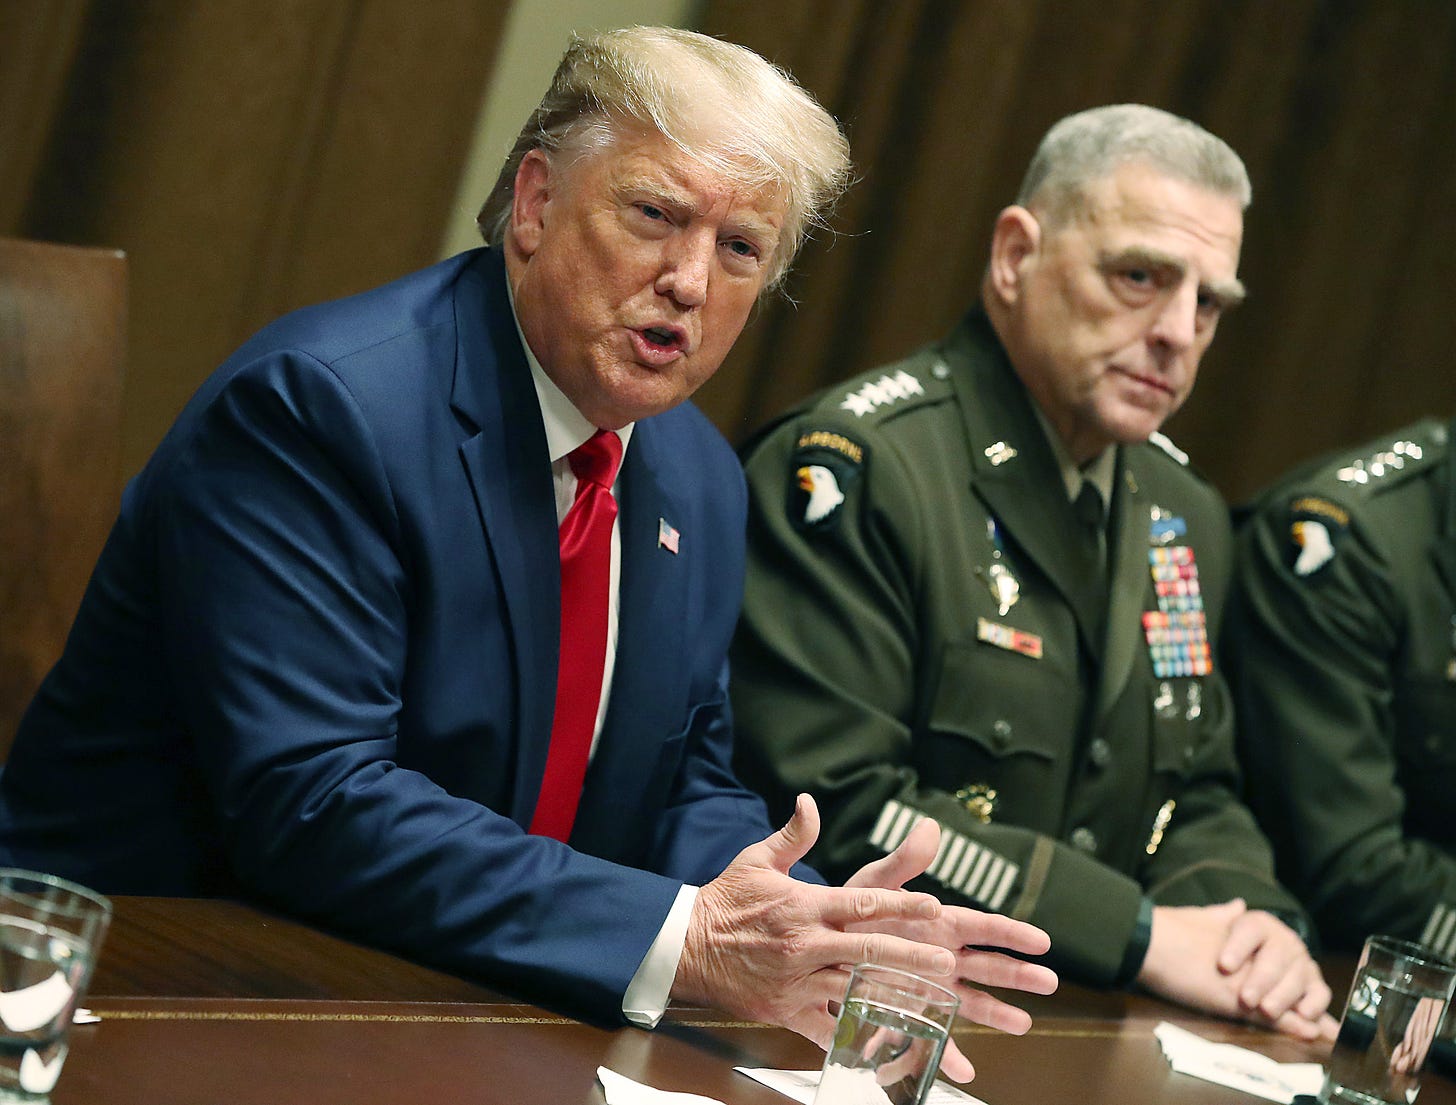 Then-President Donald Trump speaks as Joint Chiefs of Staff Chairman Mark Milley looks on after a briefing from senior military leaders at the White House on Oct. 7, 2019, in Washington, D.C. Photo by Mark Wilson/Getty Images